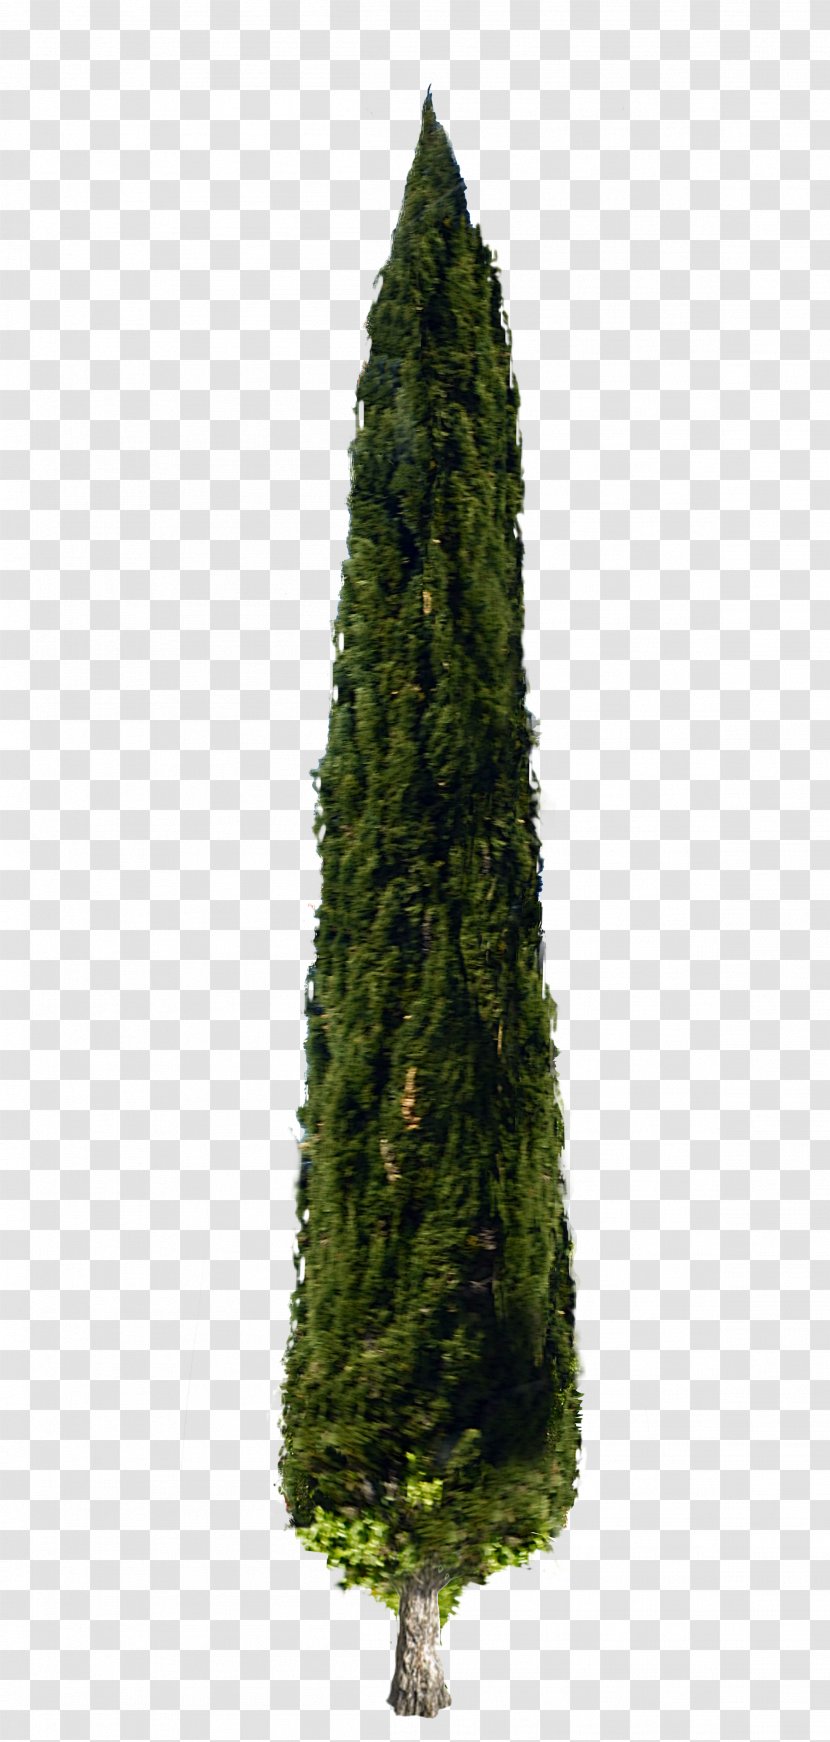 Artificial Christmas Tree Mediterranean Cypress Evergreen Conifers - Italy Transparent PNG